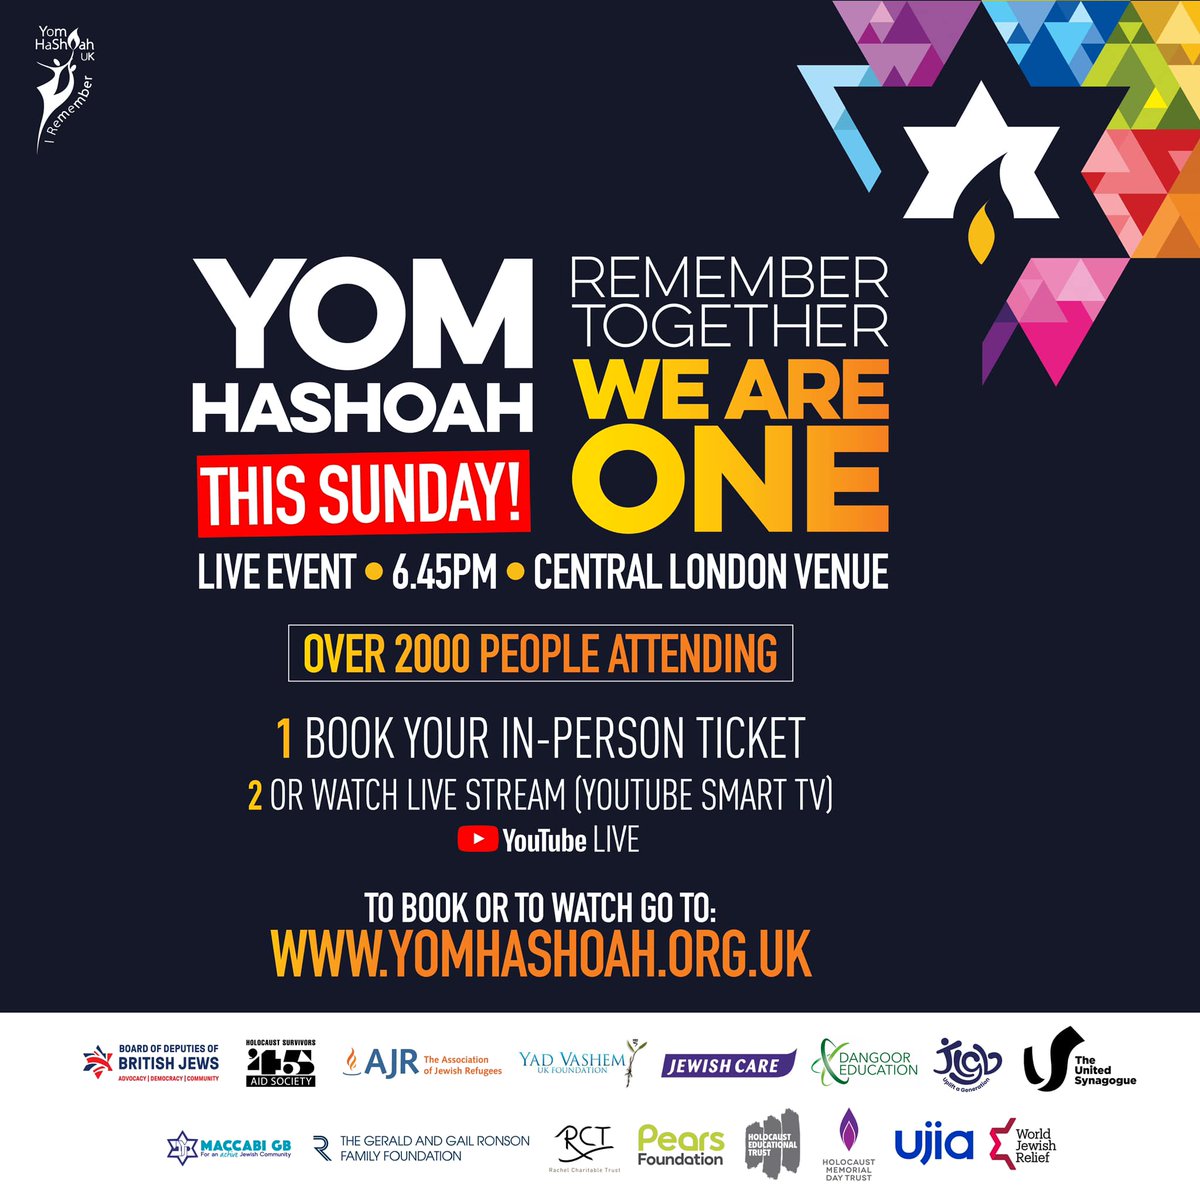 The @yomhashoahuk commemoration takes place today at 6.45pm. You can join live online in two ways: 1) Via the yomhashoah.org.uk/live website 2) Via our @LiberalJudaism and @ReformMovement Facebook pages. Rabbi Alexandra Wright will be representing our movements at the event.